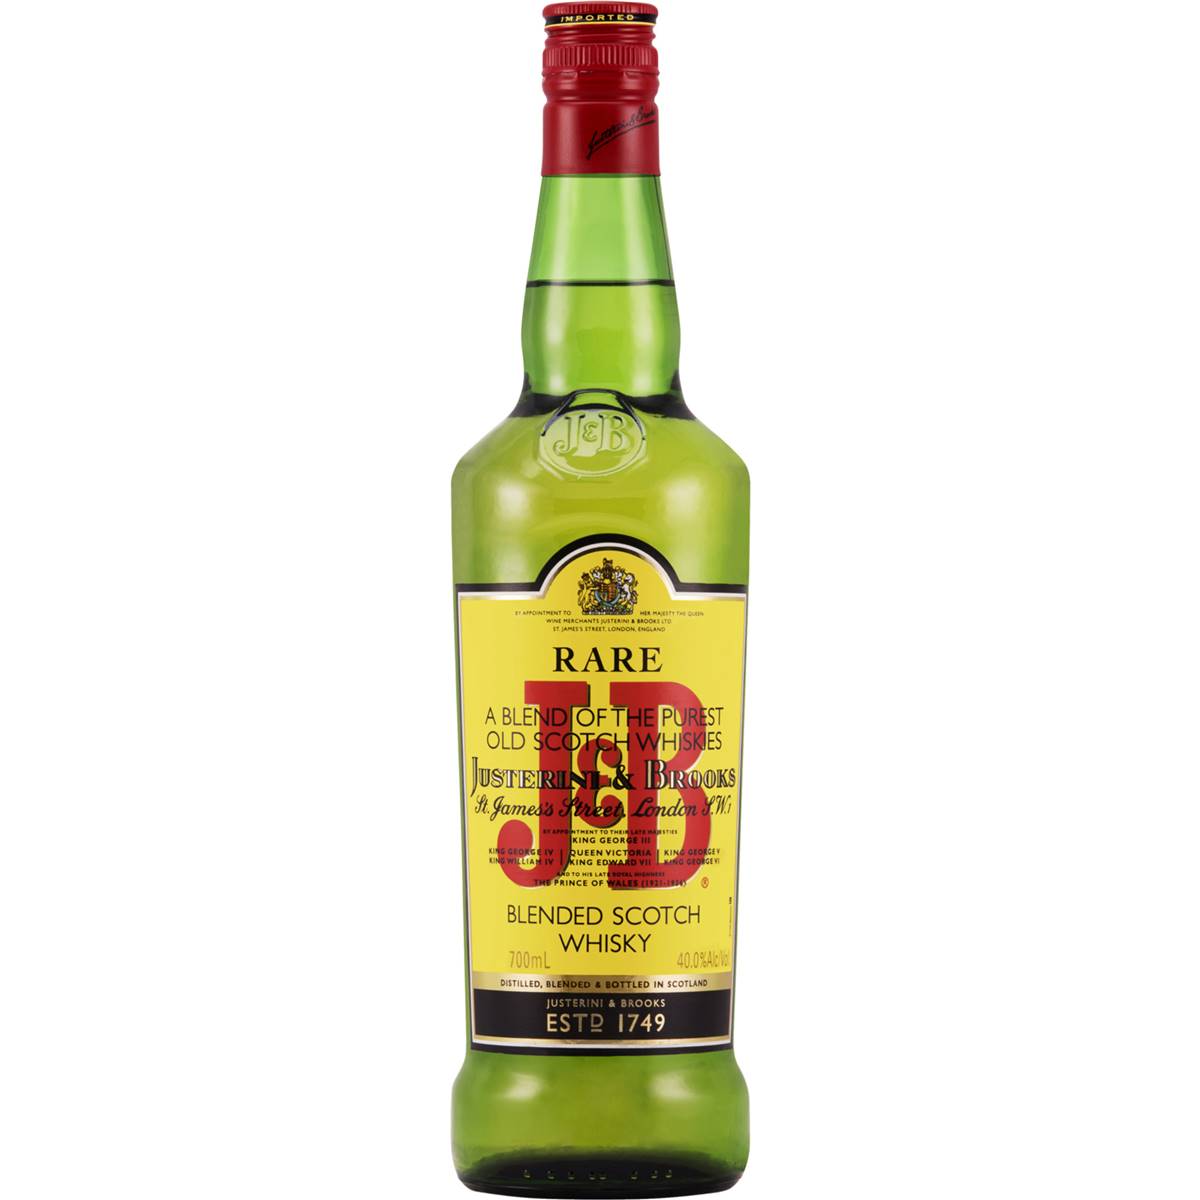 Calories in J & B Rare Blended Scotch Whisky